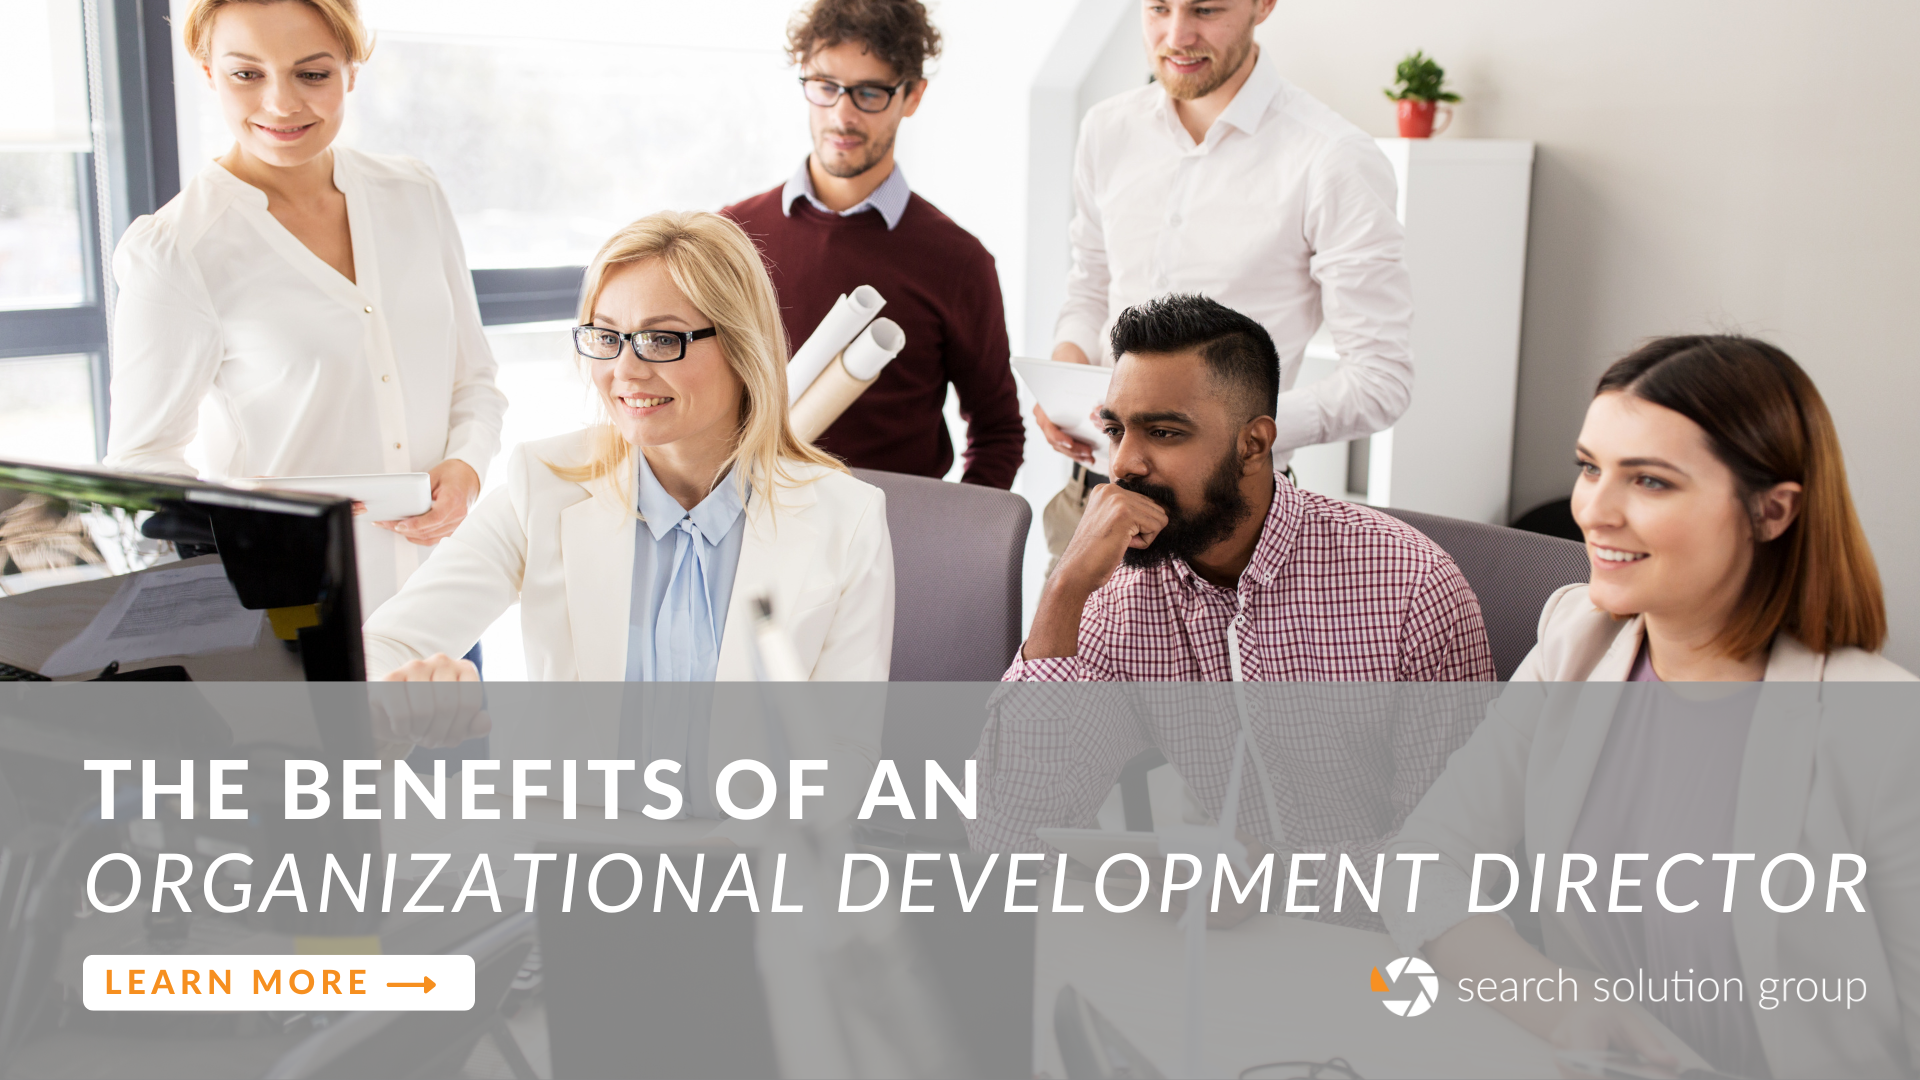 What are the Benefits of an Organizational Development Director? 